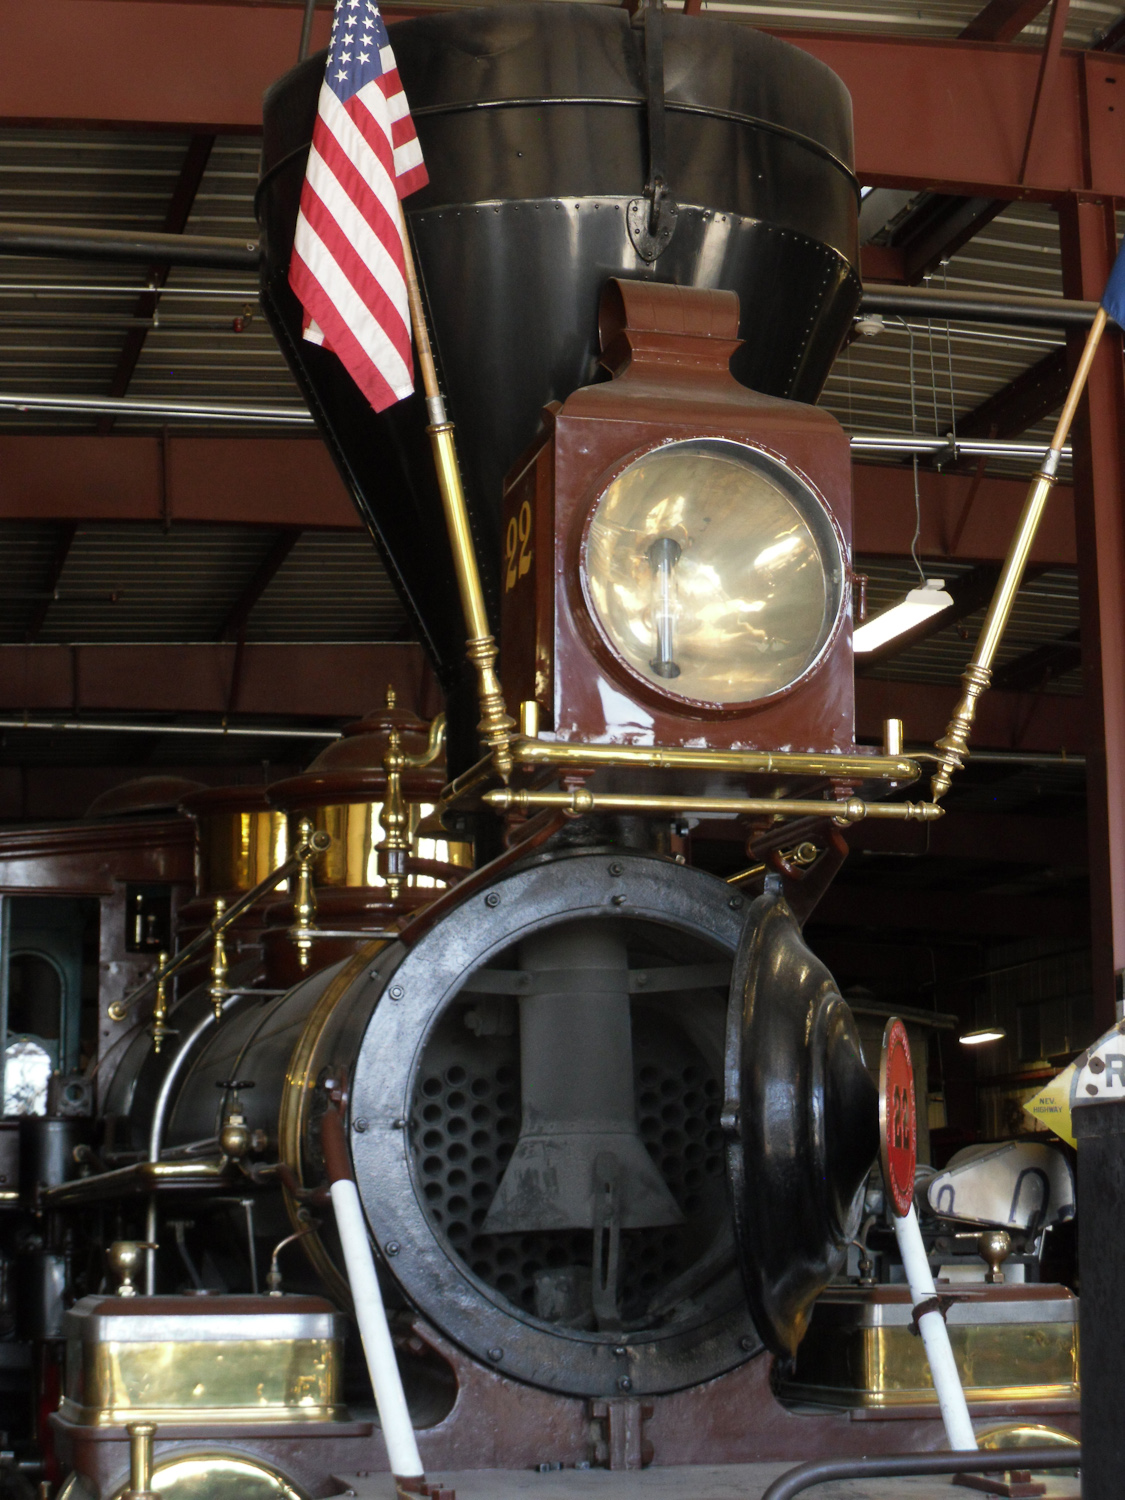 View of the Inyo boiler and venturi.